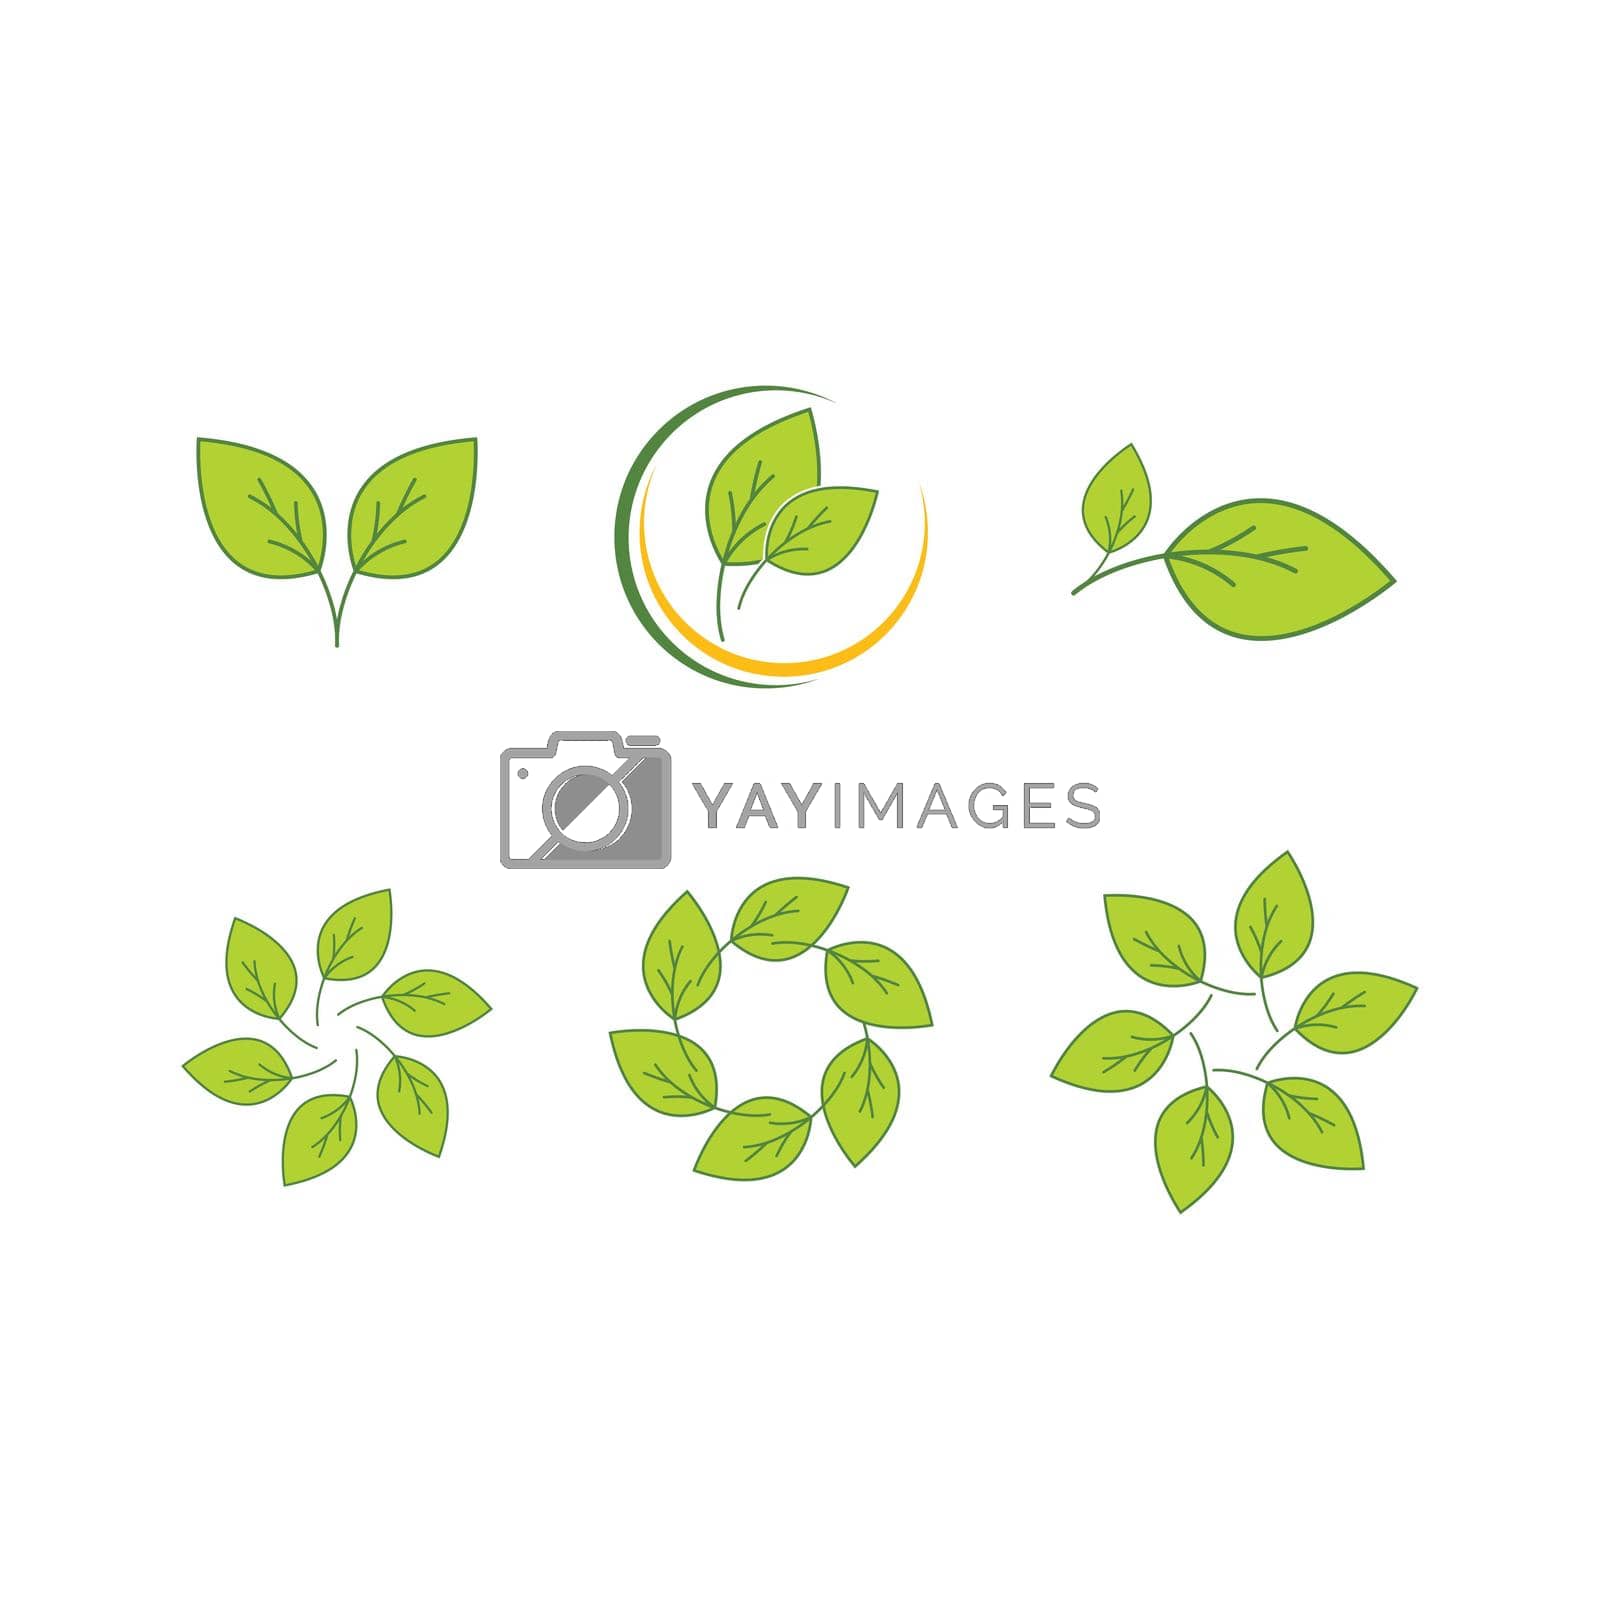 Royalty free image of Green leaf logo by awk